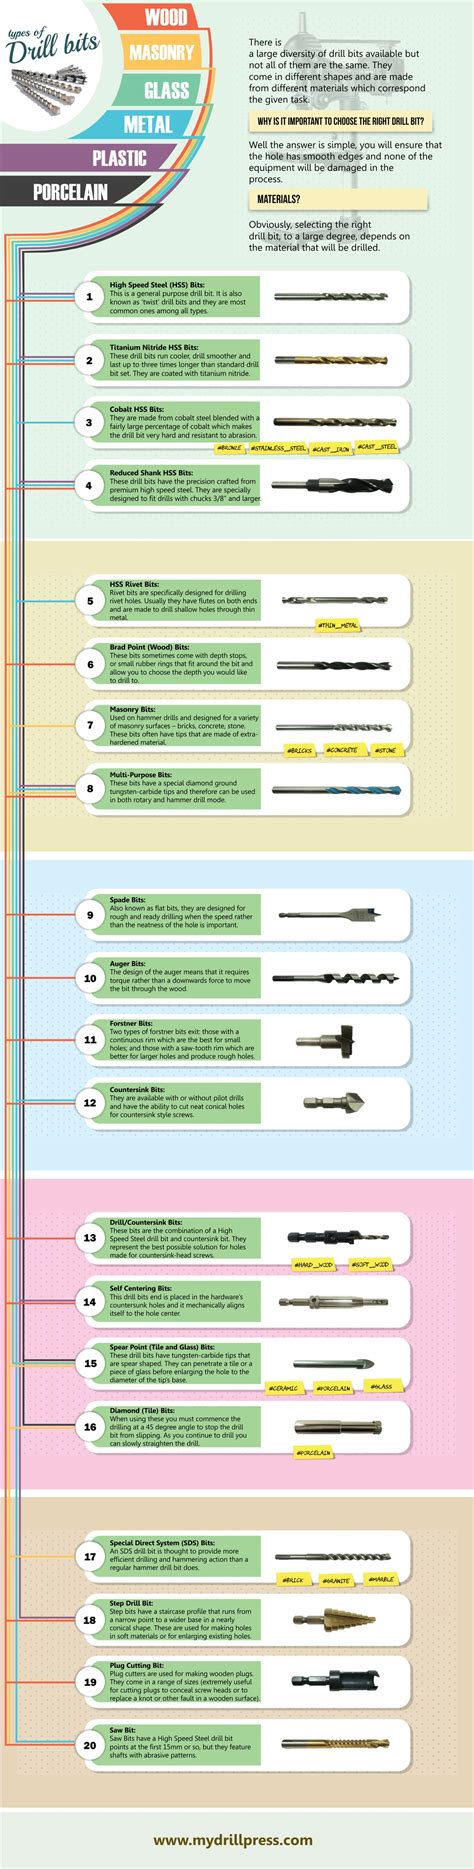 types  drill bits infographic infographic infographic plaza